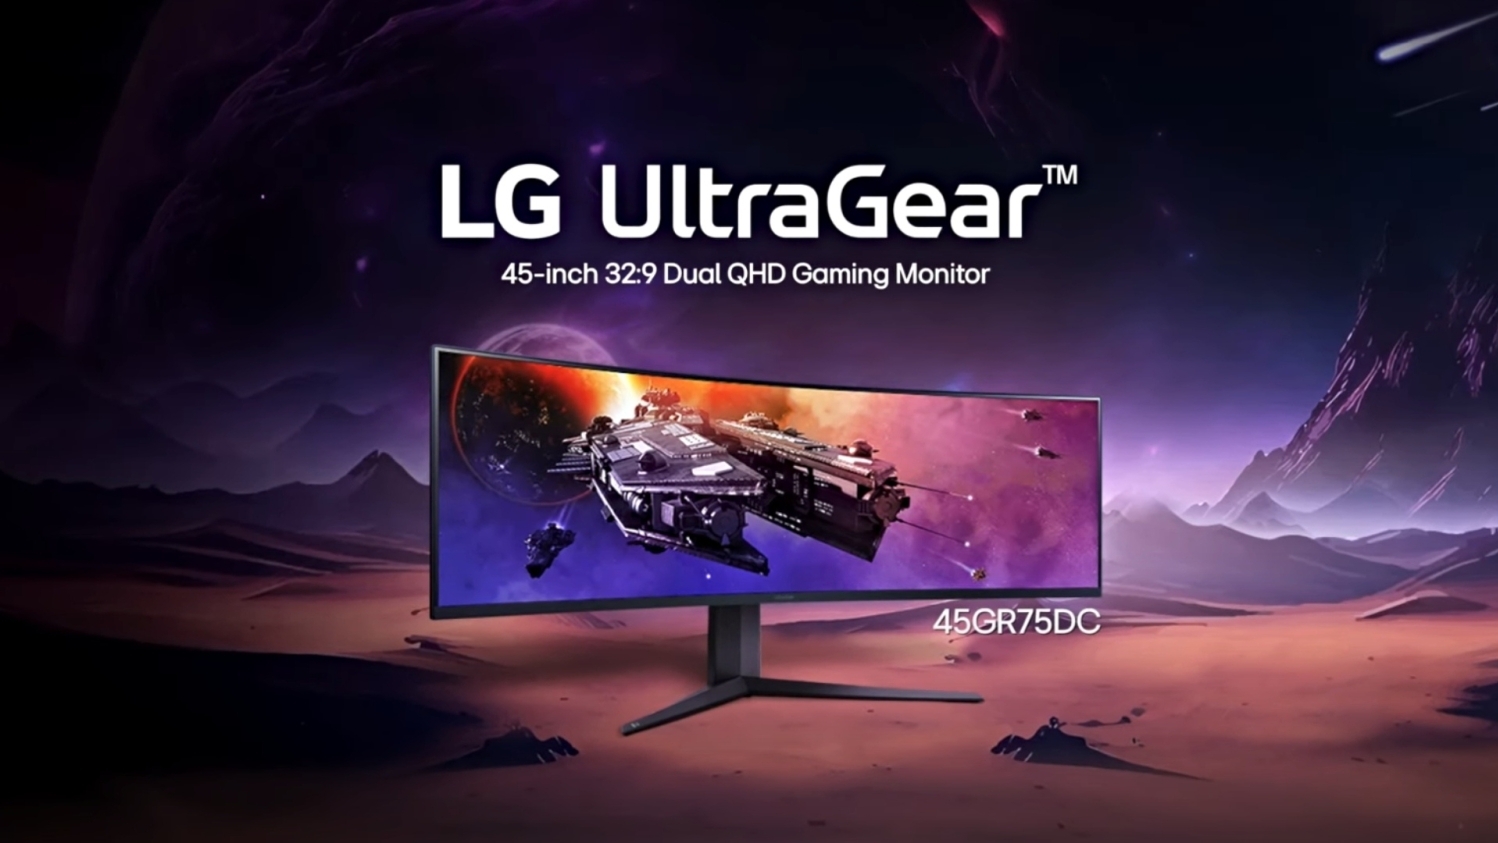 New LG UltraGear gaming display slaps two 1440p displays together into a  45-inch UltraWide